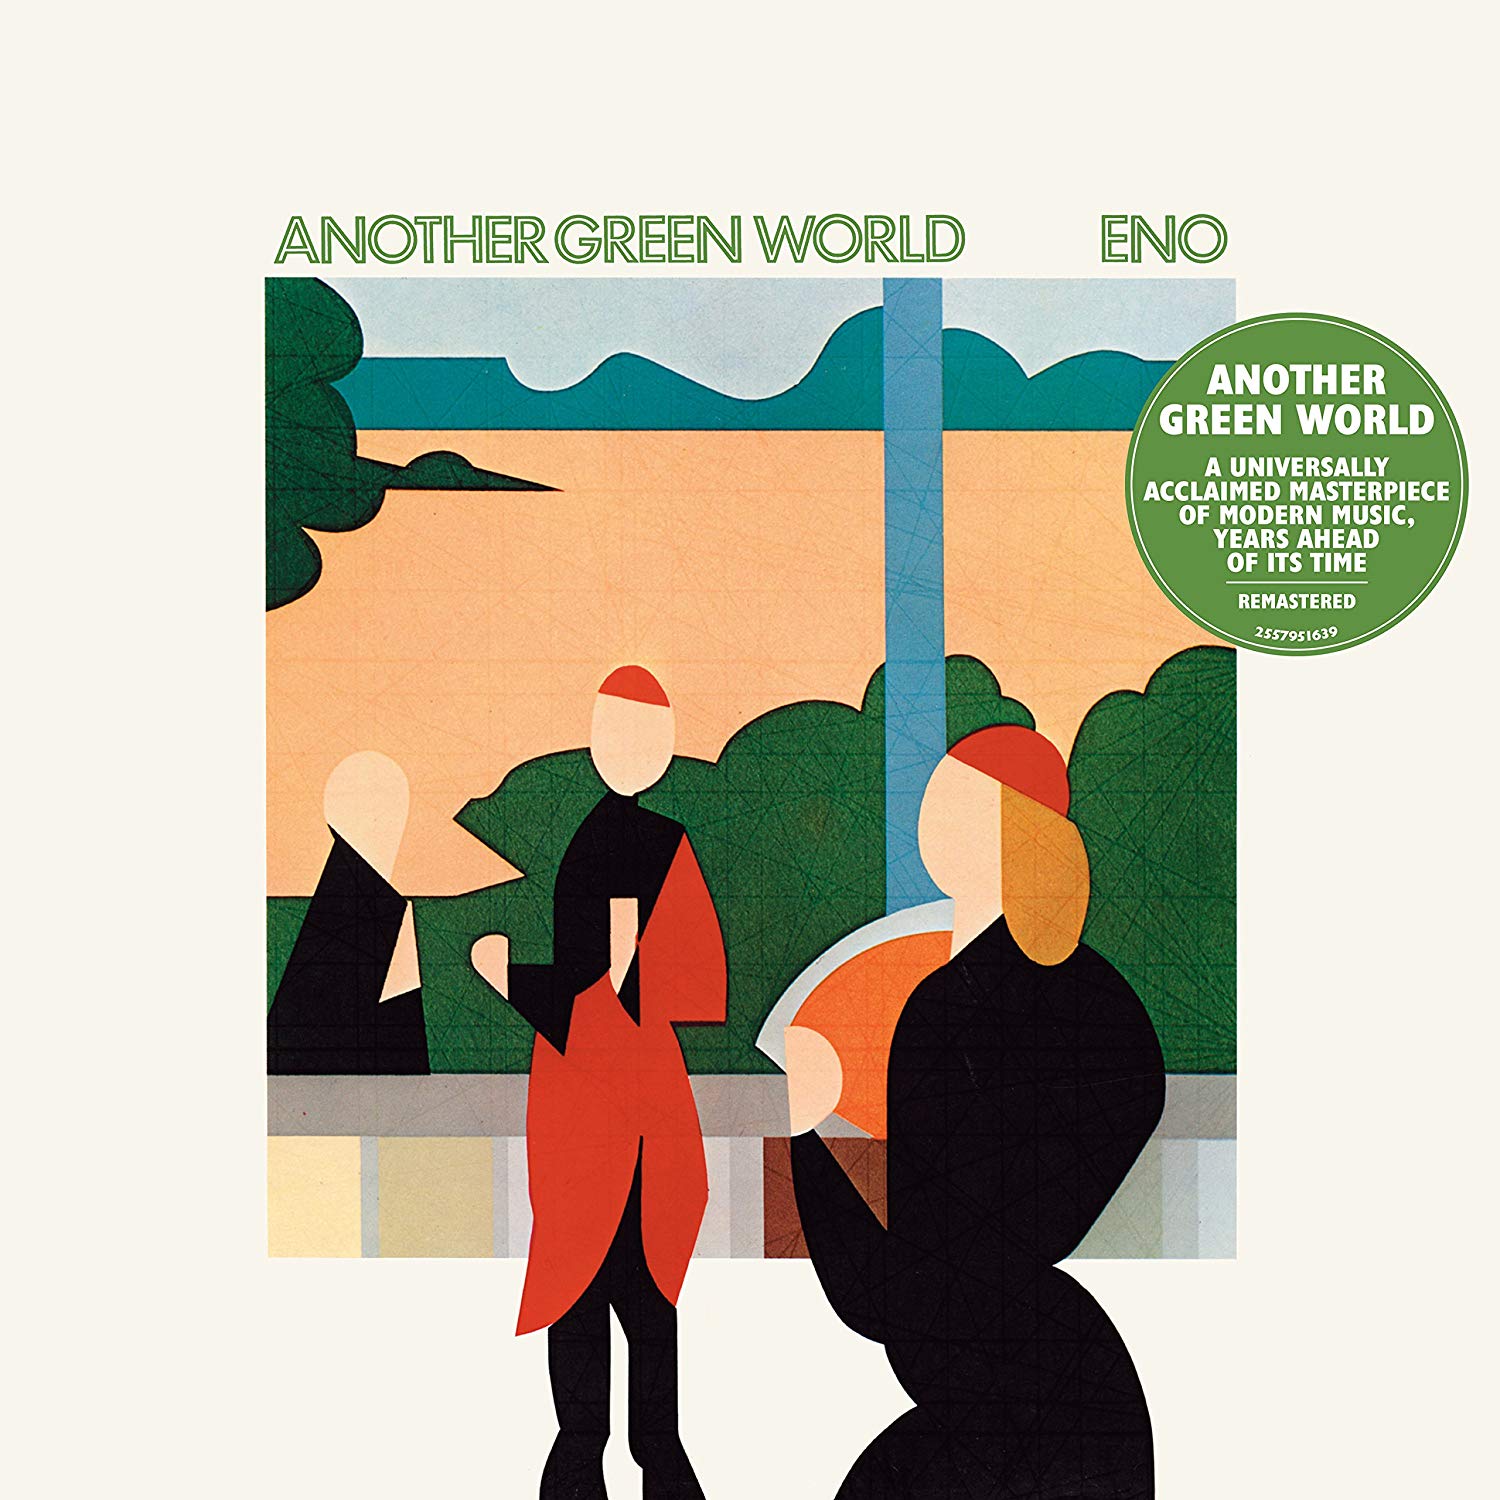 Brian Eno - Another Green World [LP] - Amazon.com Music